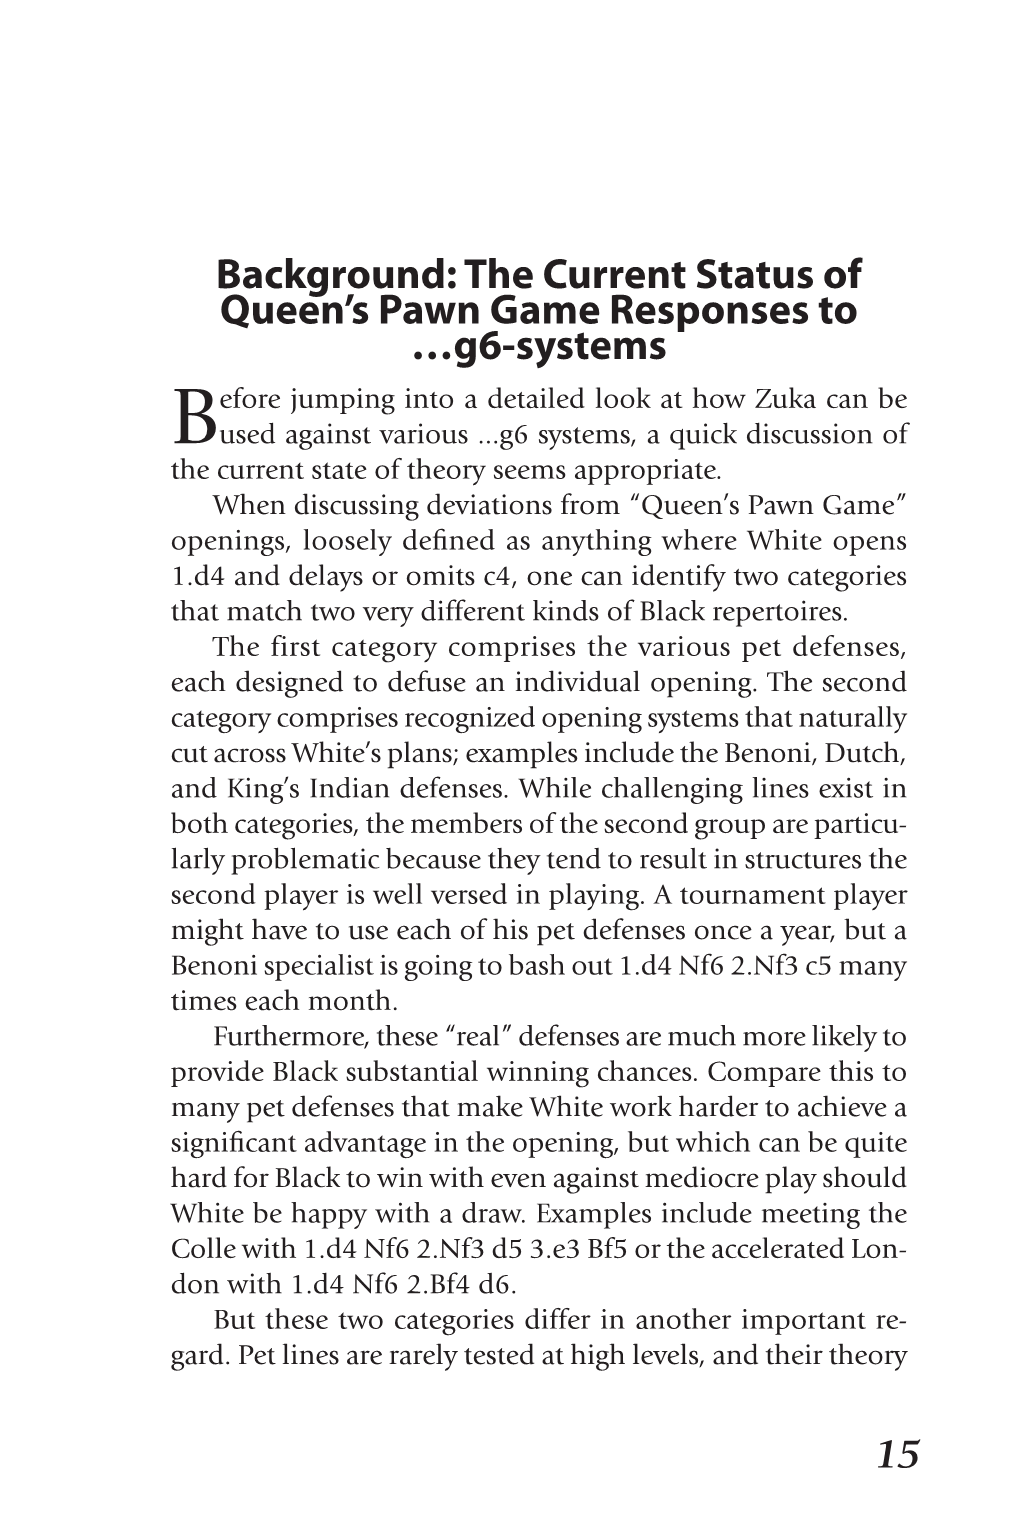 The Current Status of Queen's Pawn Game Responses to …G6-Systems